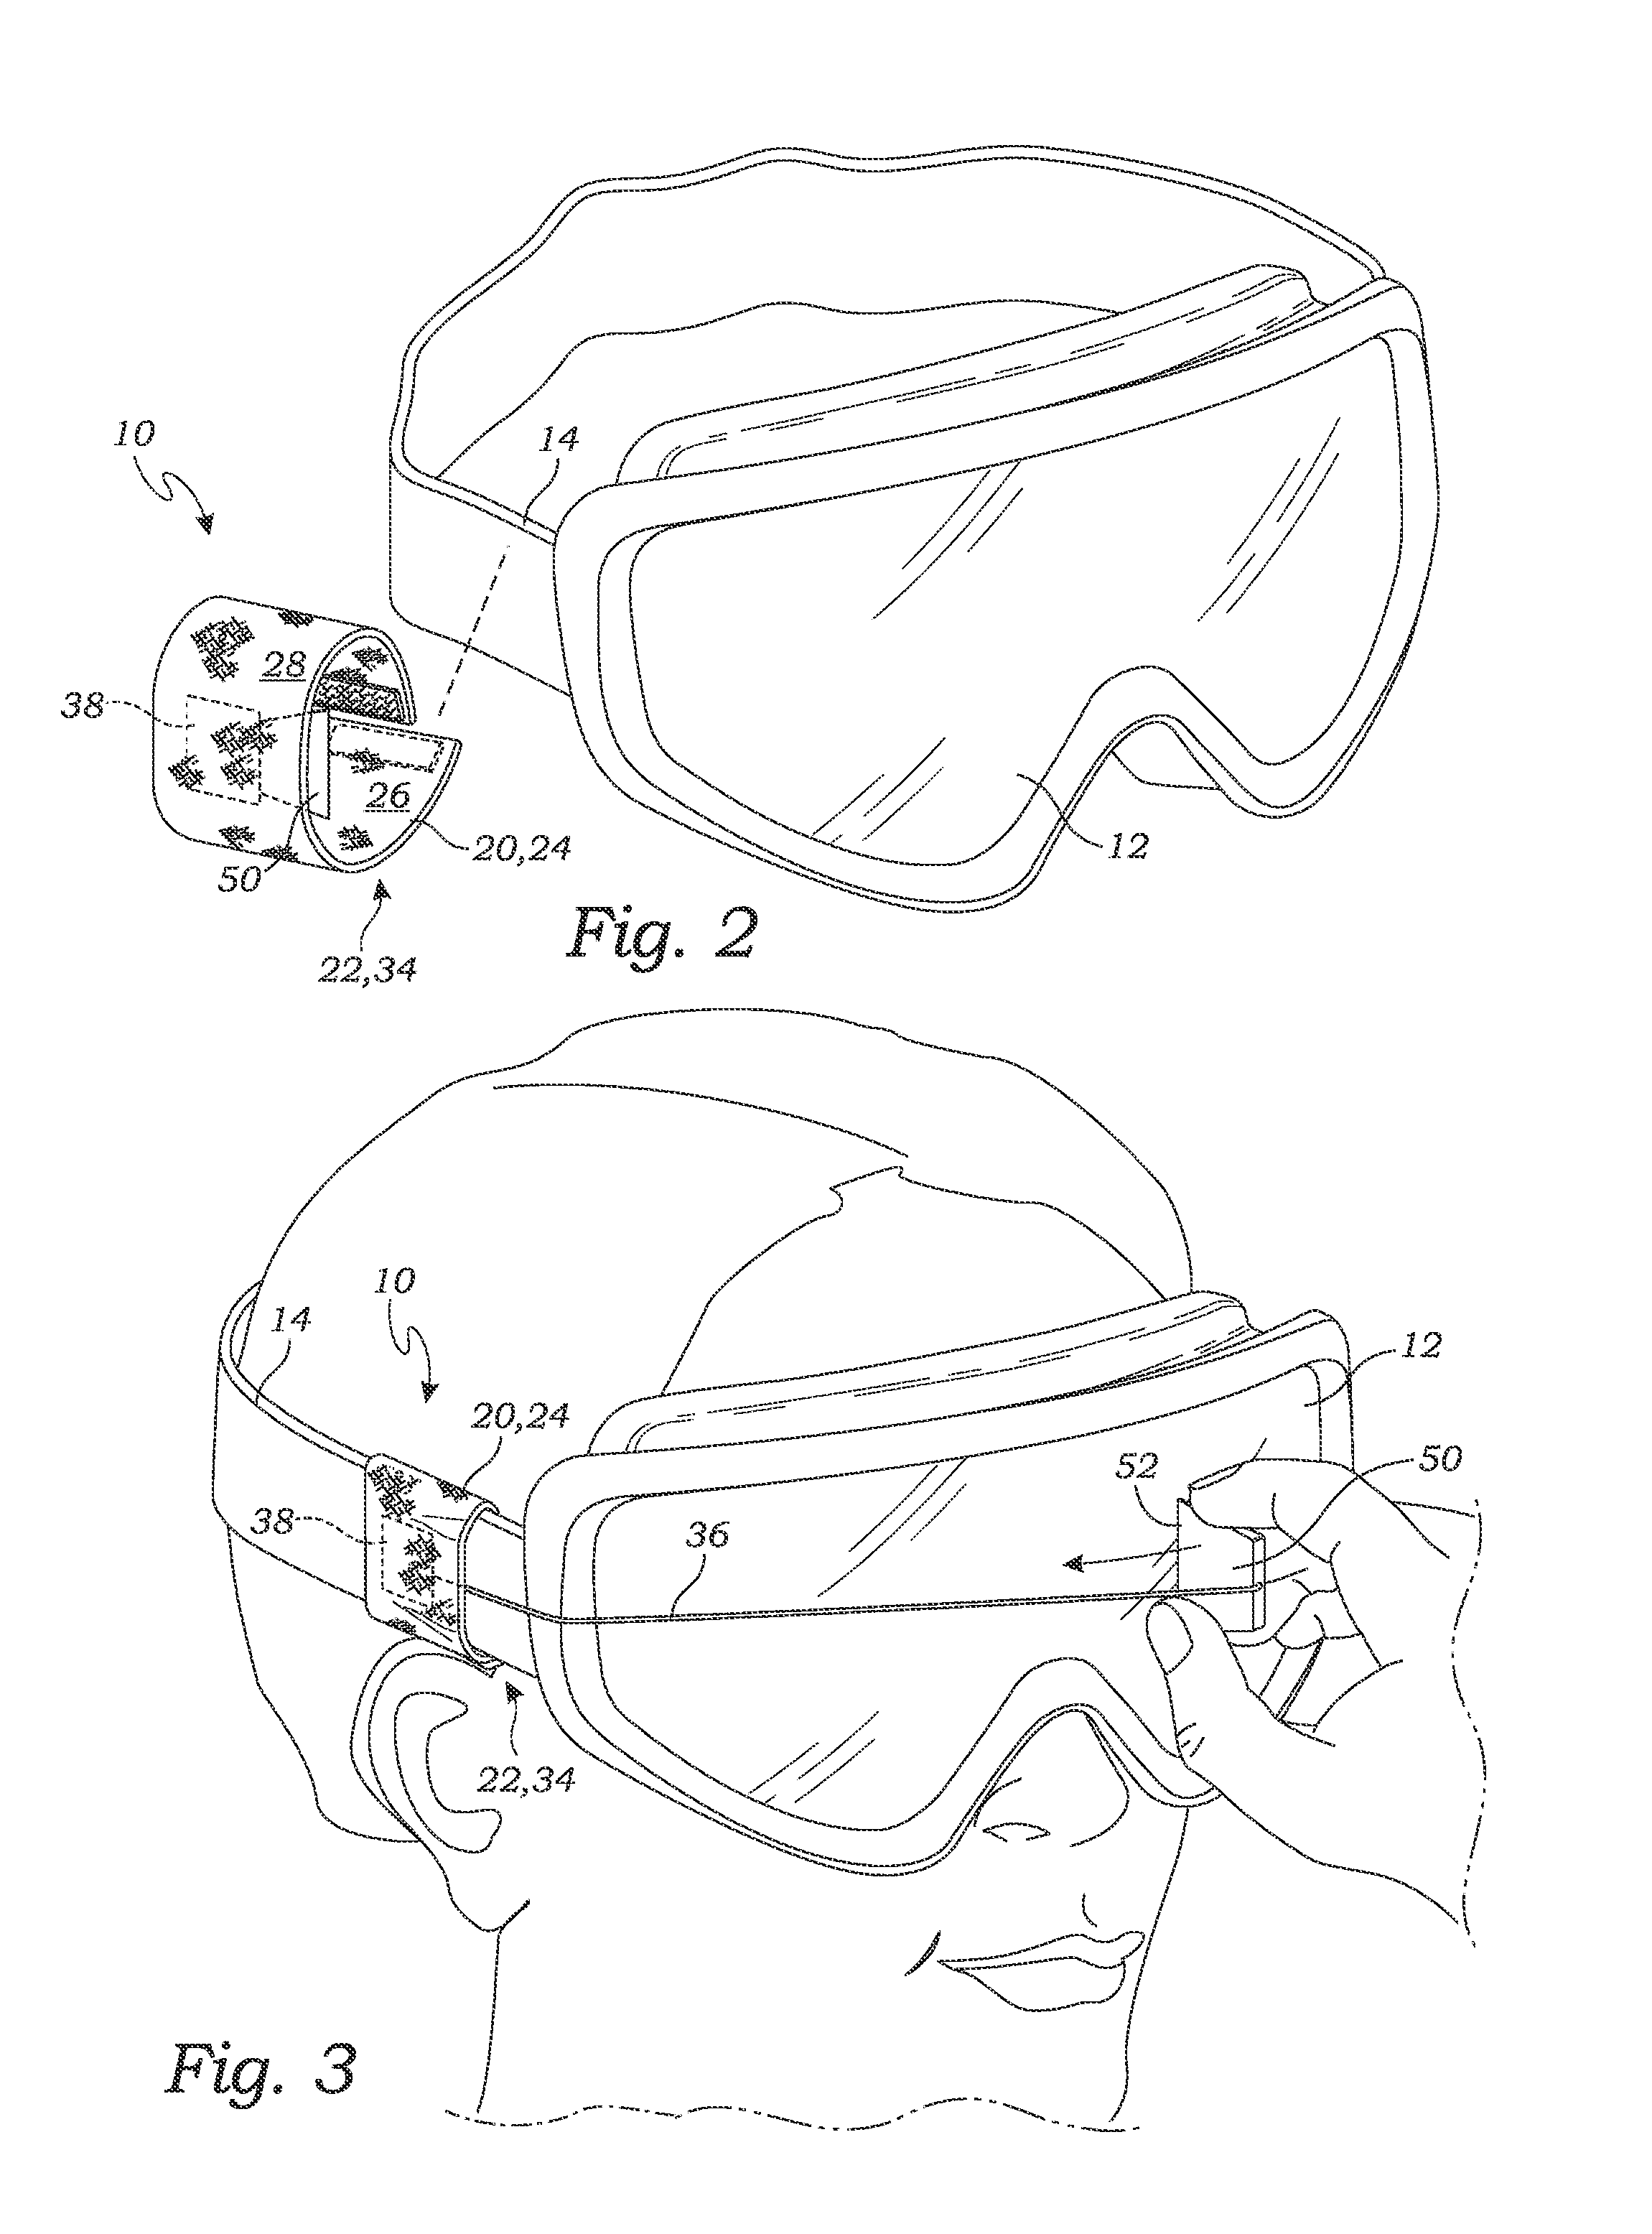 Eyewear cleaning device and method of use